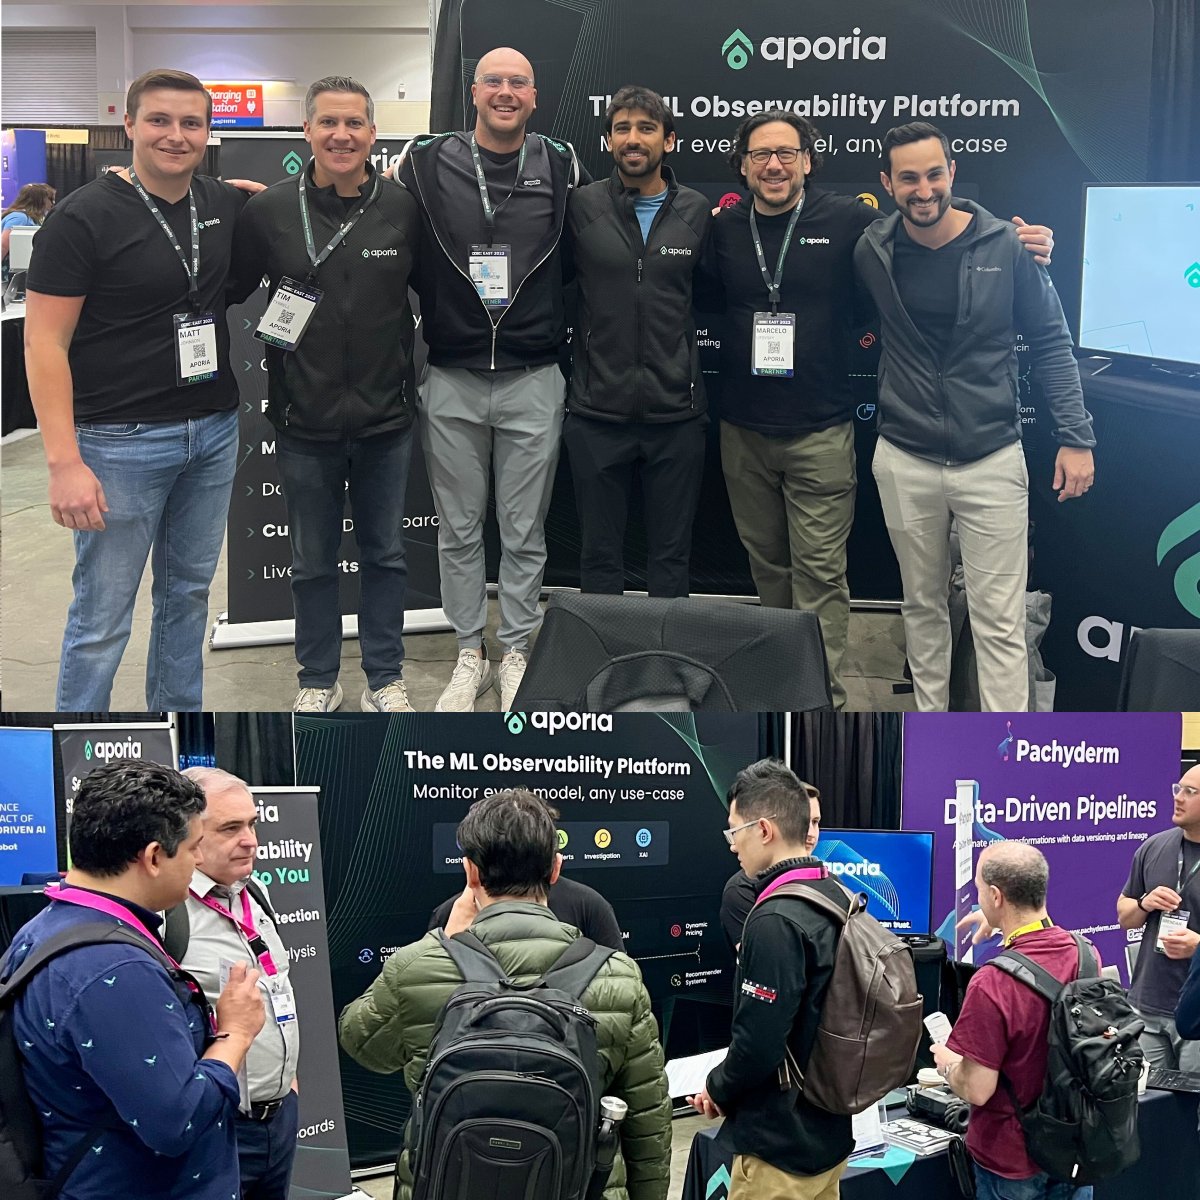 Excited to be among the best and brightest at @_odsc  East in #Boston 💥 There’s an awesome turnout, and we’re headed for a two-day rollercoaster of data science, #ML Observability, networking, and industry insights!

#MLOps #DataScience  #AI #ODSCeast #ODSCBoston  #ODSC